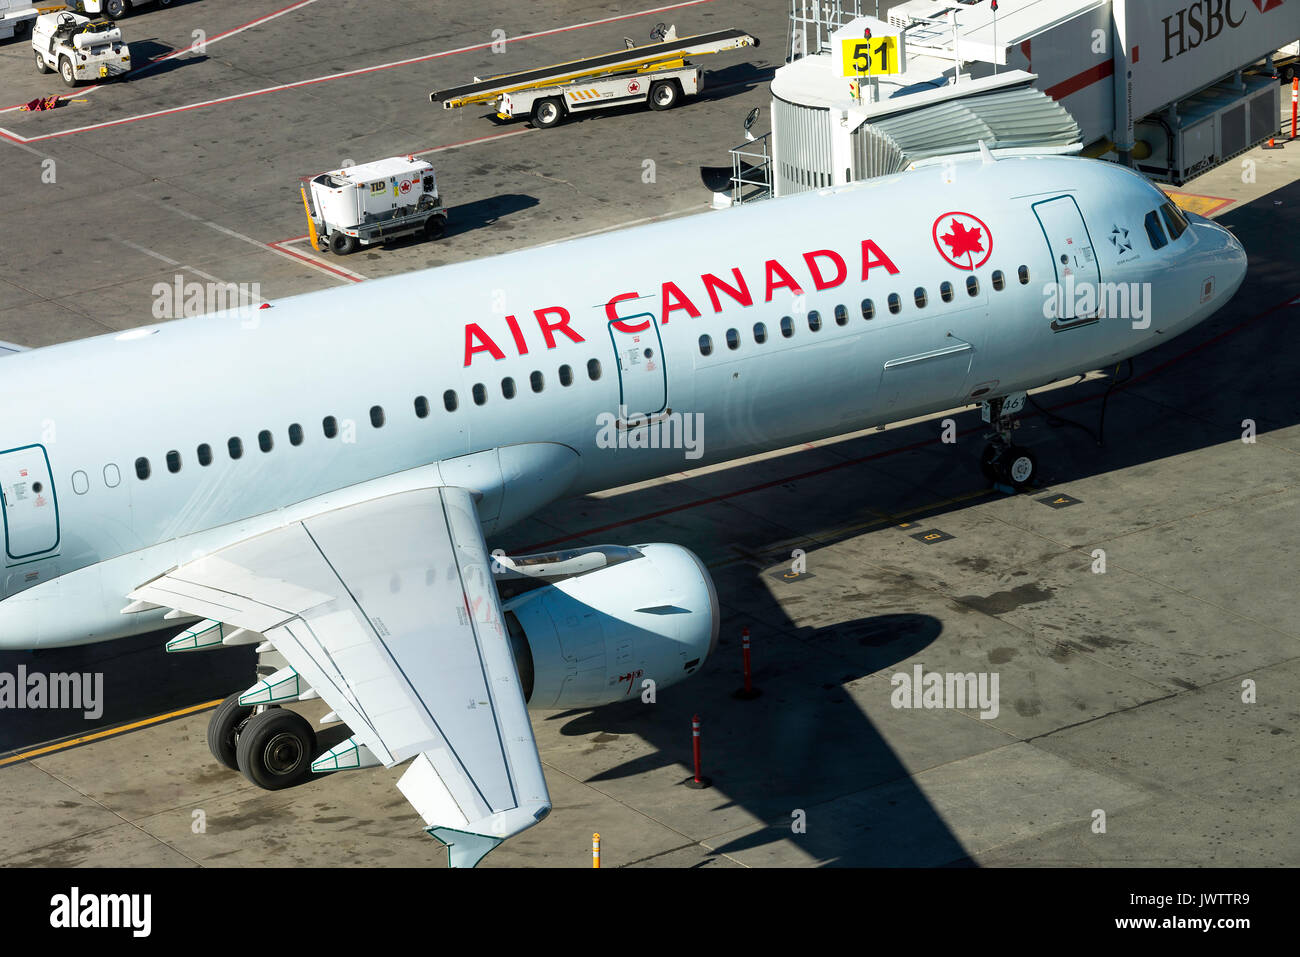 Air Canada Airline Airbus A321-211 Airliner C-FGKN On Stand Awaiting Loading at Calgary International Airport Alberta Canada Stock Photo